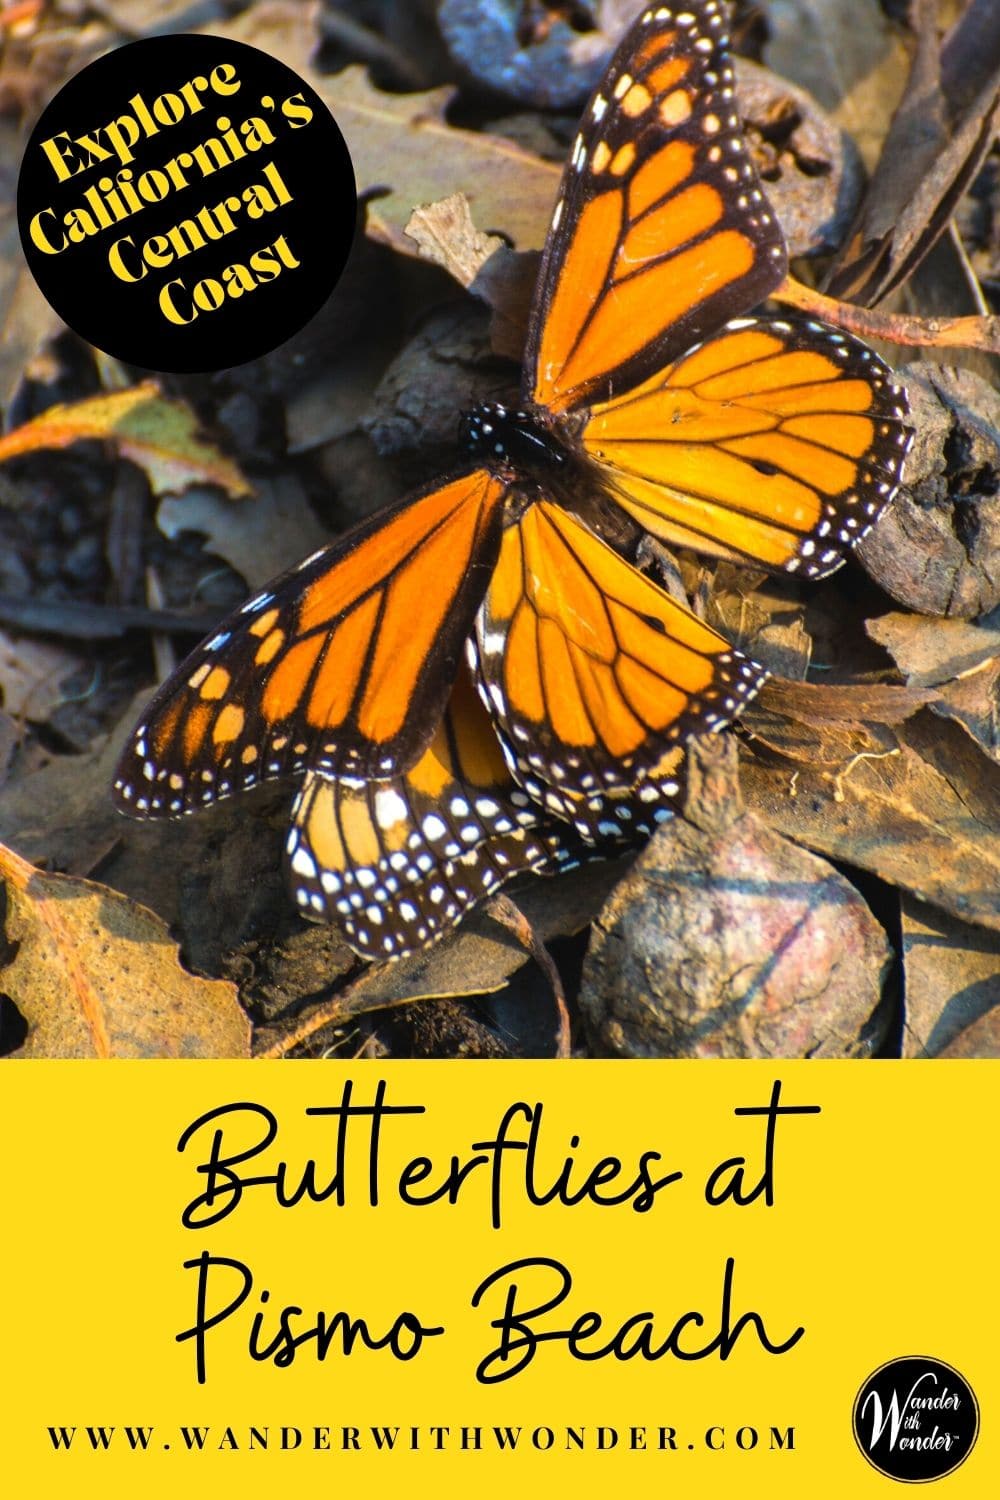 Visiting the butterflies at Pismo Beach Monarch Grove as they migrate through California every October through February is a wow moment you won't likely forget. Here's what you need to know to visit the butterflies in their winter habitat along the California Coast.